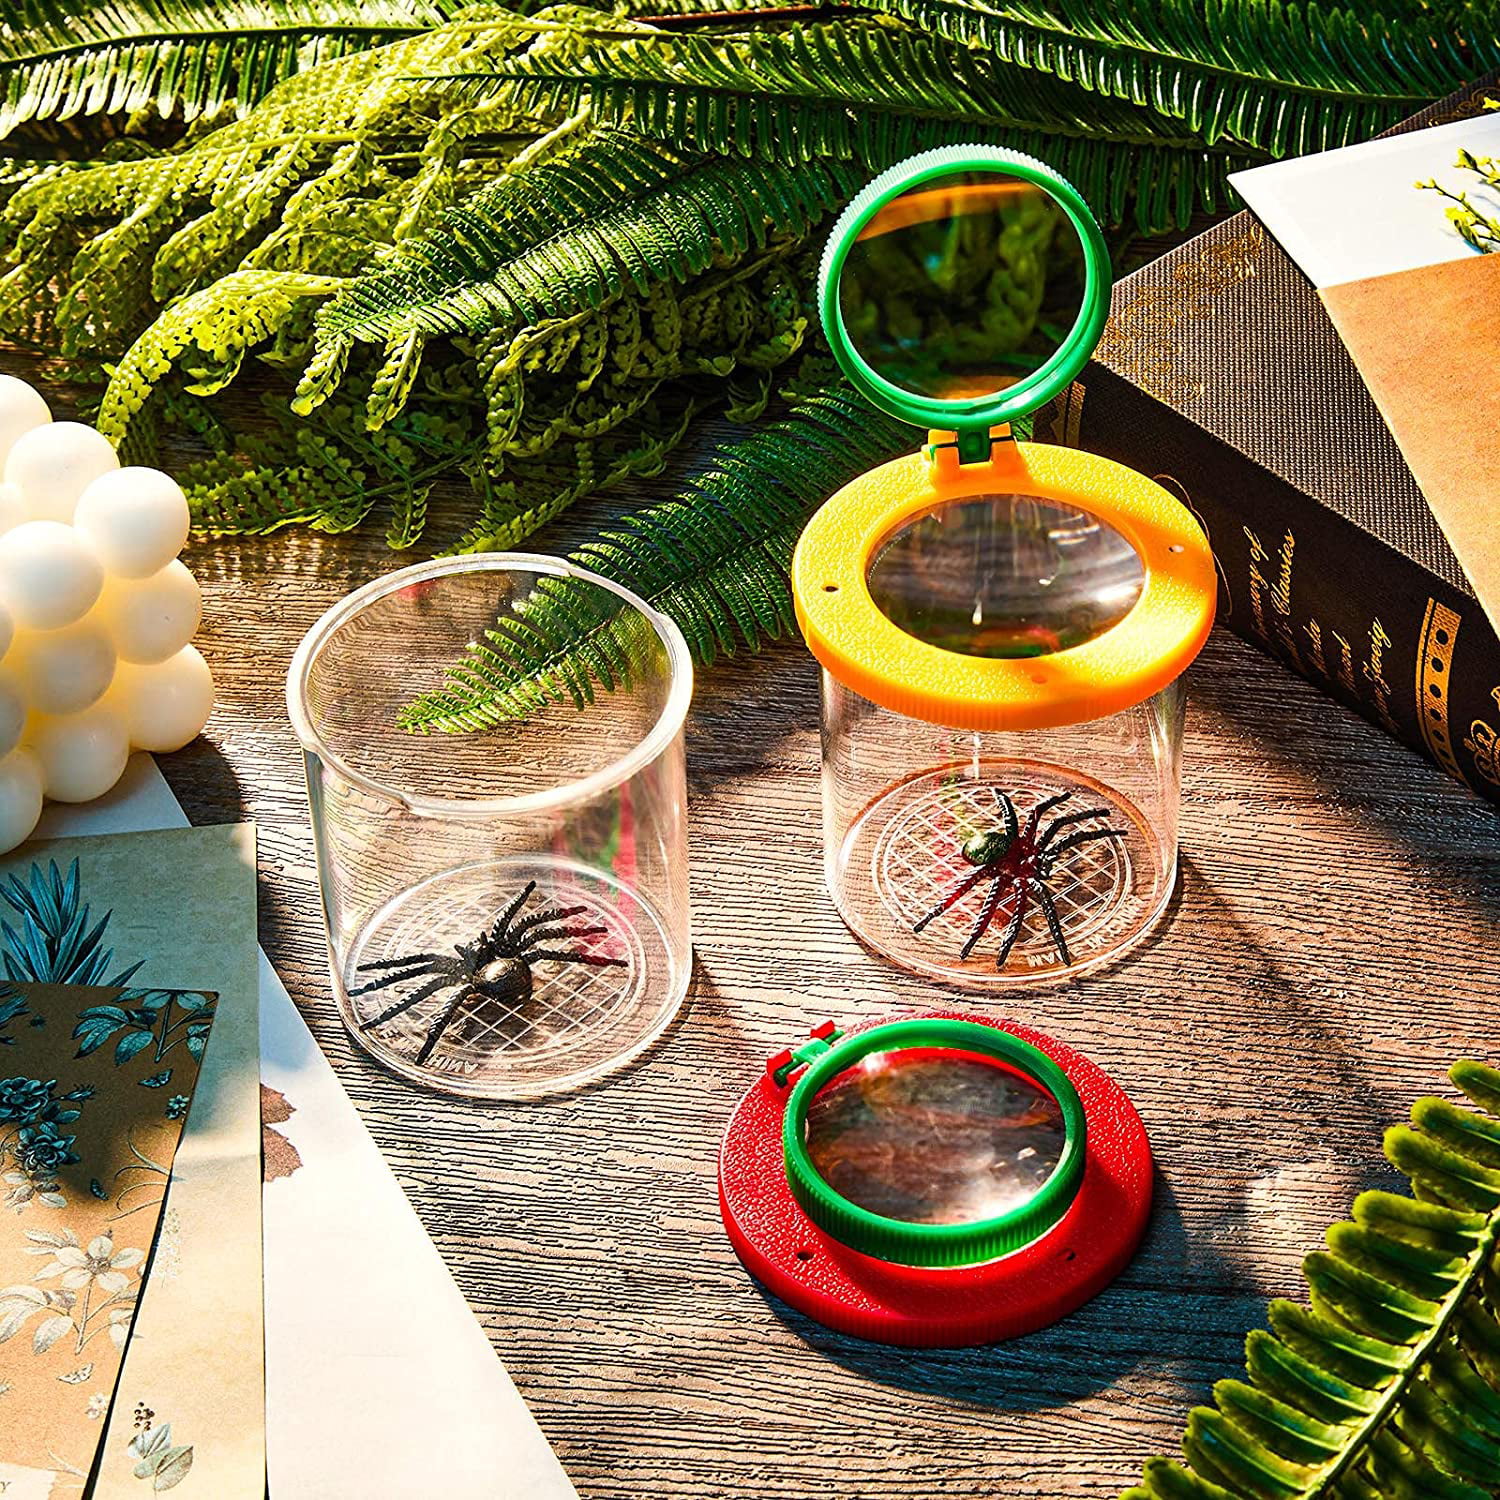 Details about   Clear Bug Observe Box Jar Holder Container Insect Viewer Magnifier Kids Toy 2.5" 